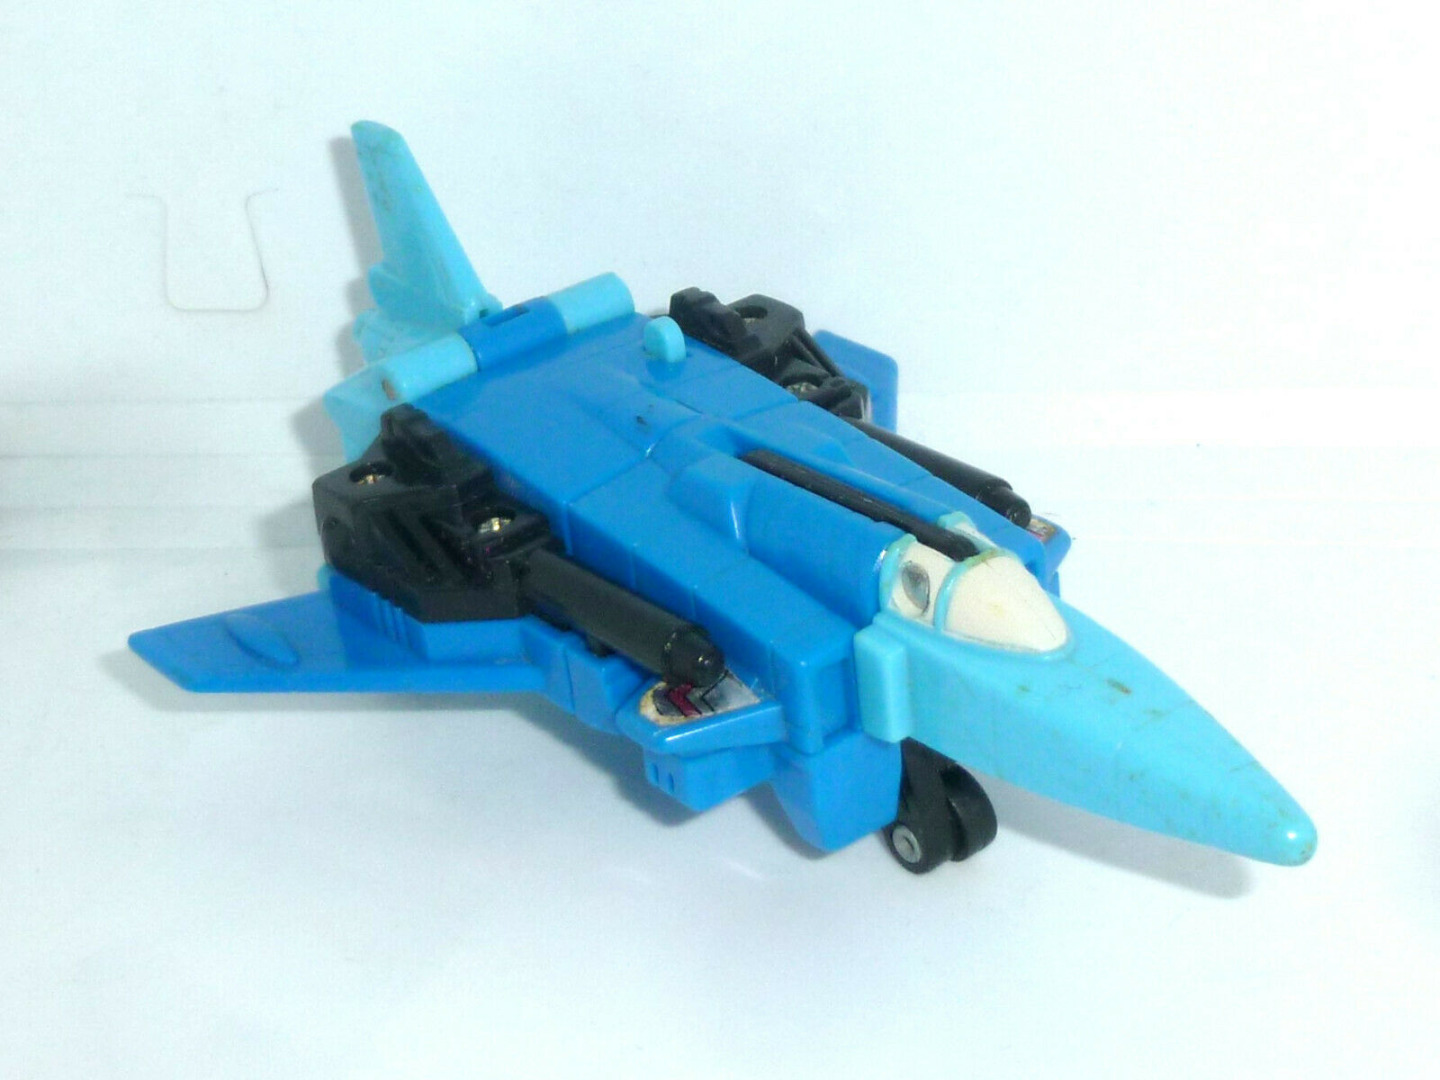 Transformers - Dogfight - Kampfjet - G1 Triggerbots and Triggercons 4